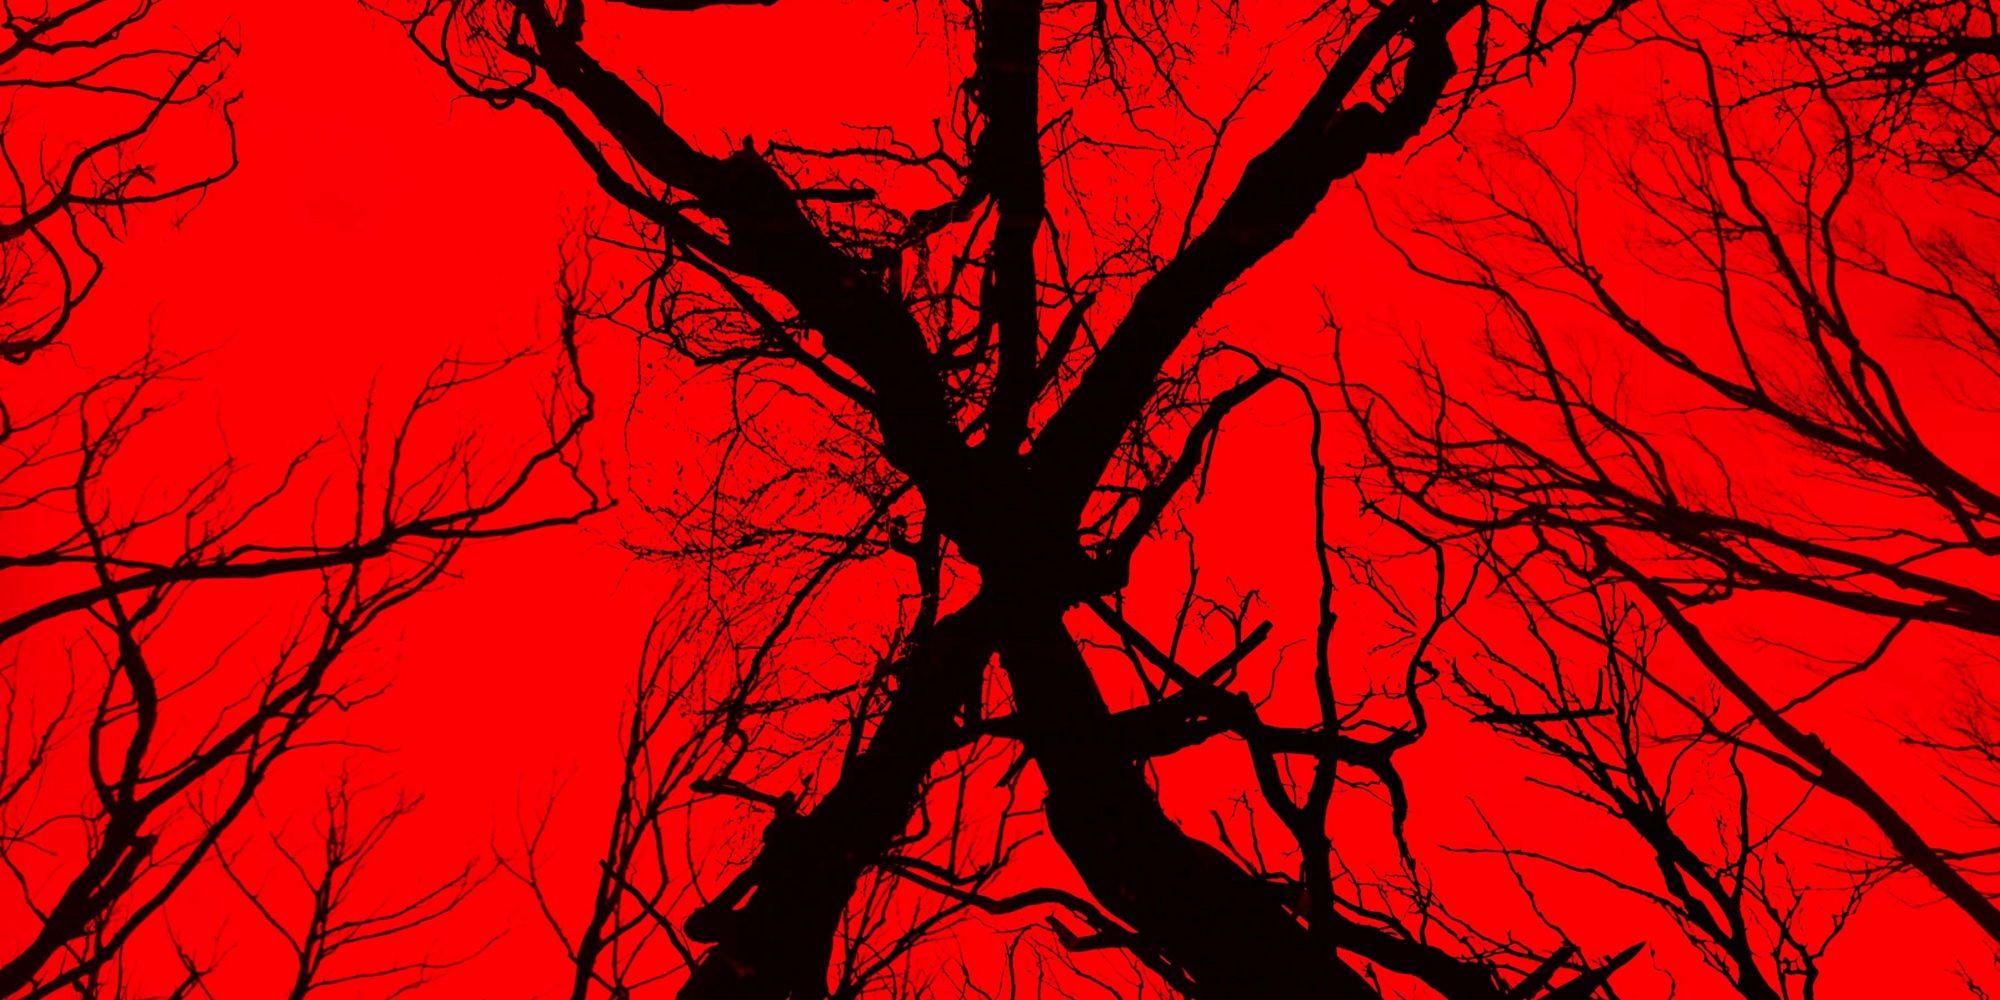 A Complete Guide to the Blair Witch Mythology